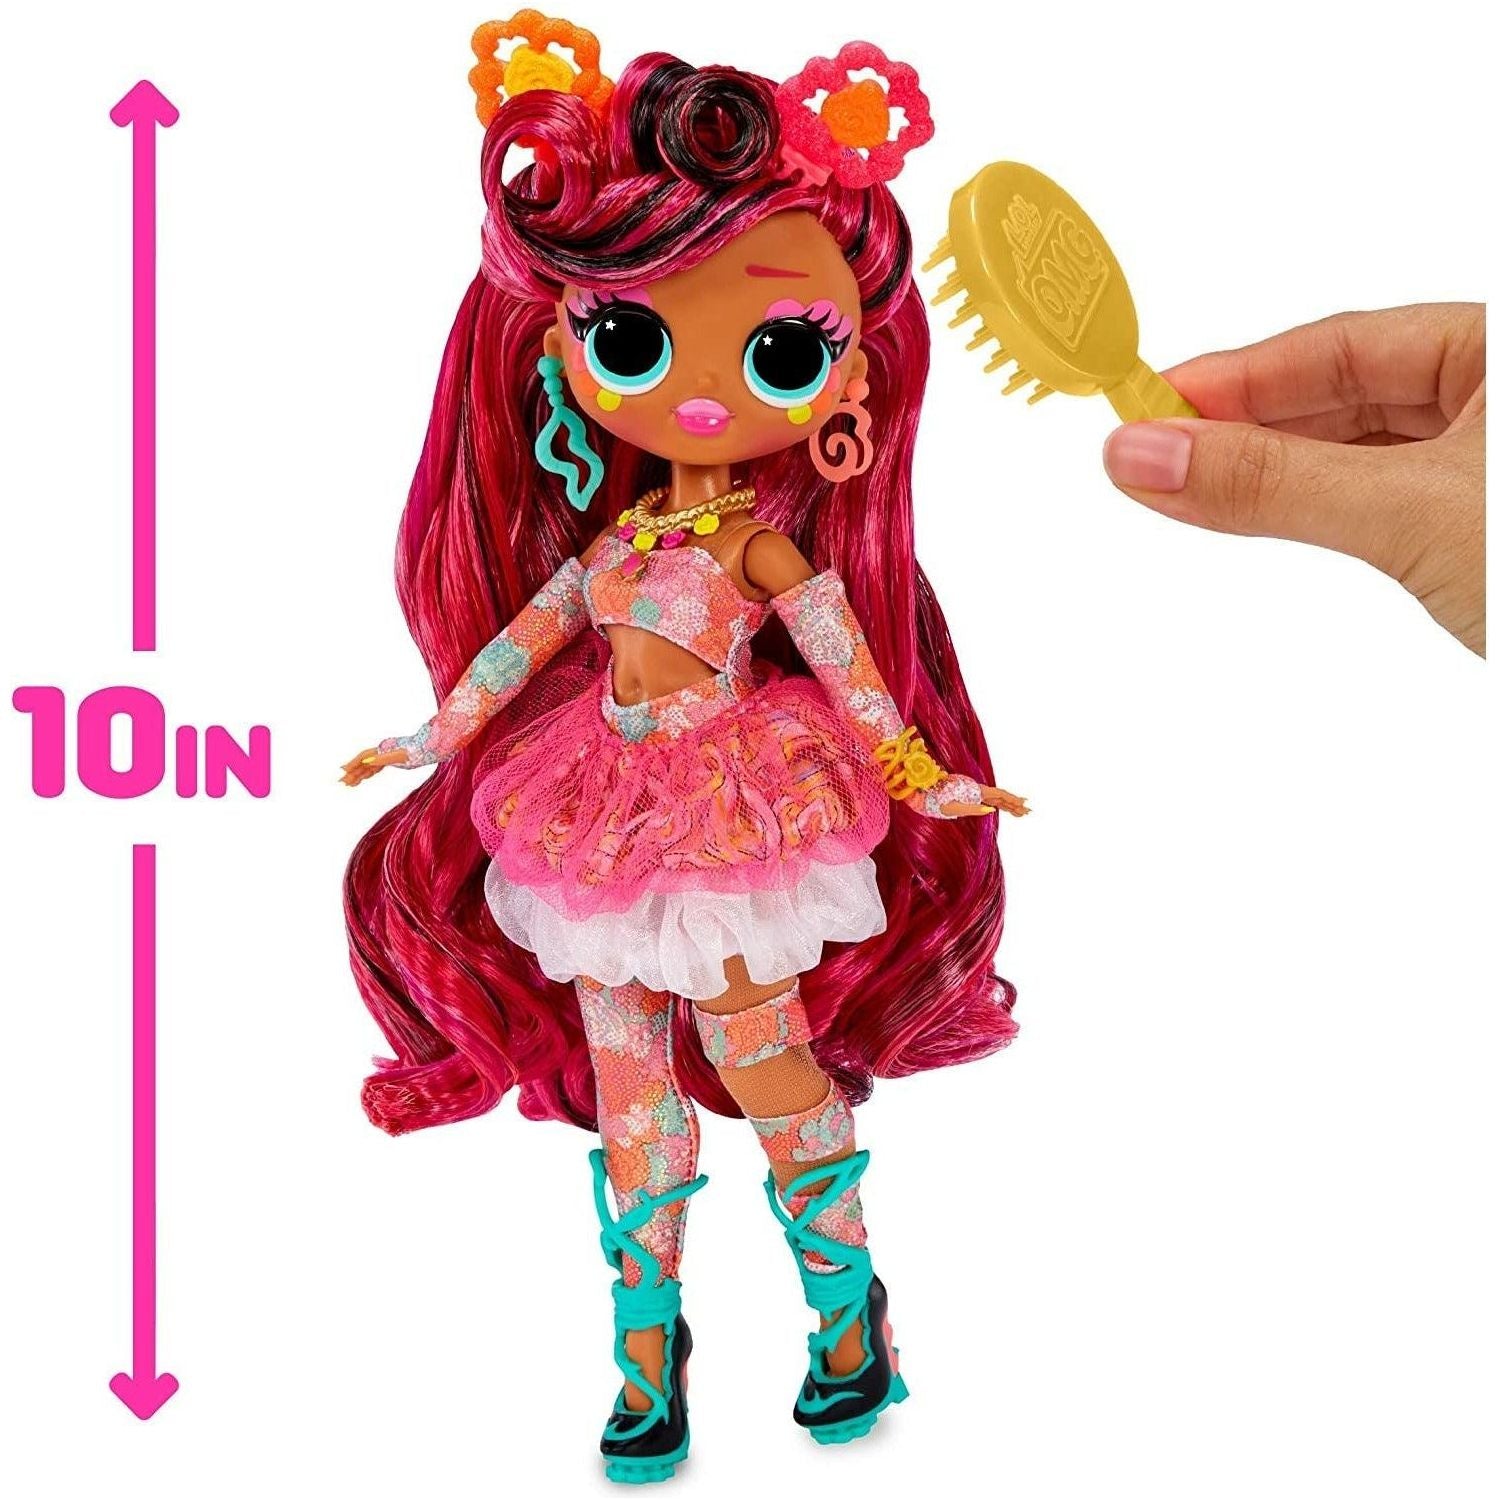 LOL Surprise OMG Queens Miss Divine Fashion Doll with 20 Surprises Including Outfit and Accessories - BumbleToys - 5-7 Years, Dolls, Fashion Dolls & Accessories, Girls, L.O.L, OXE, Pre-Order